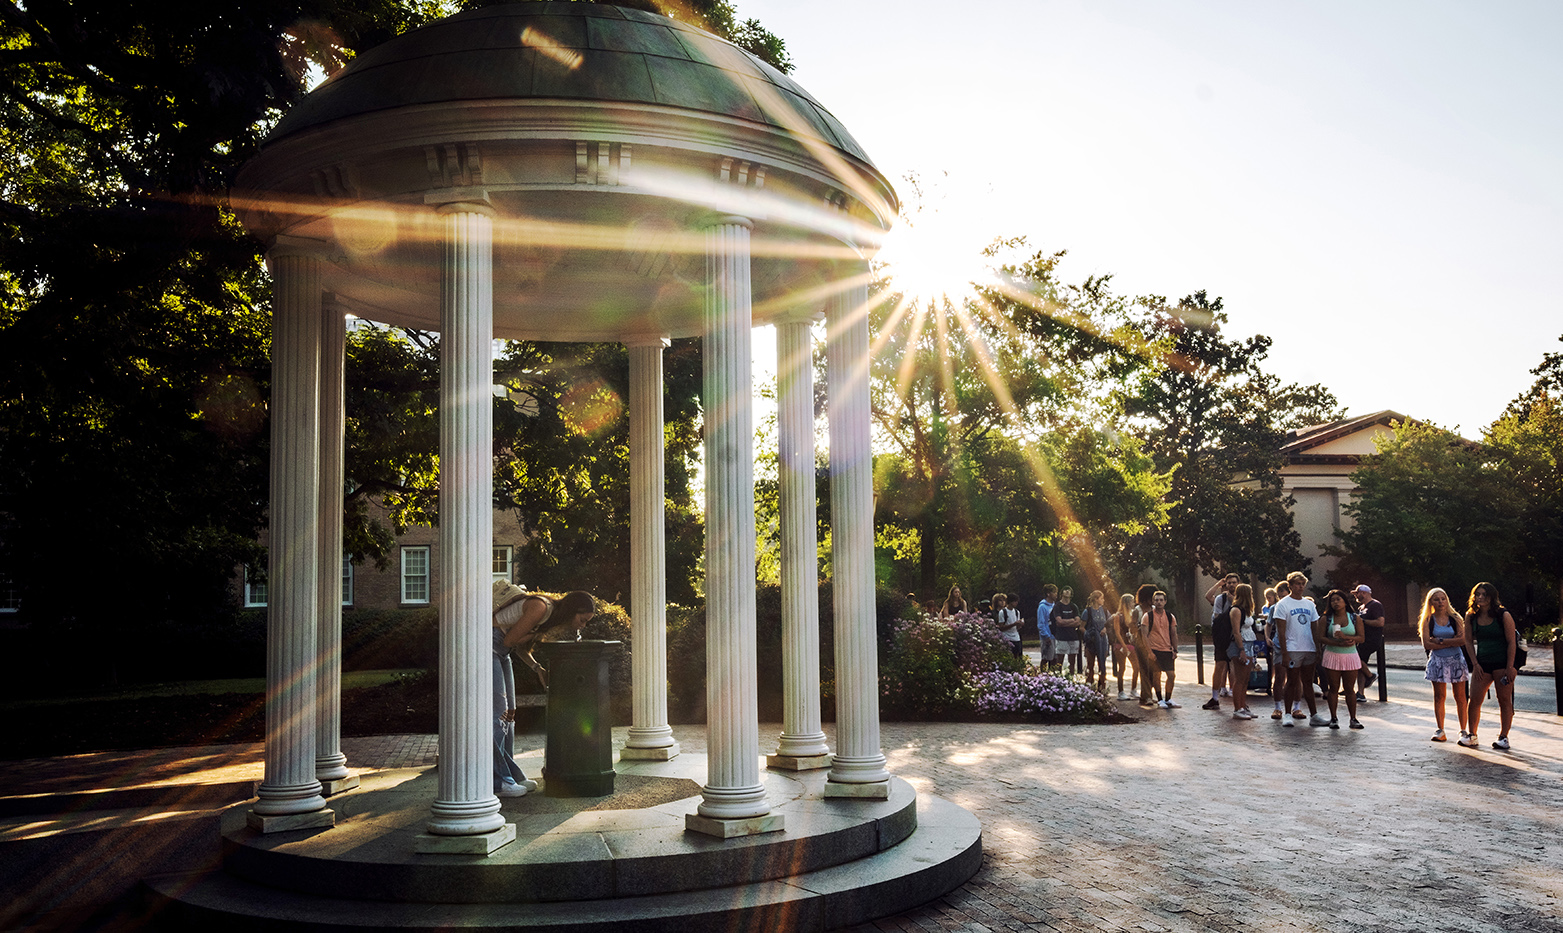 A student drinking from the fountain of the Old Well on the campus of UNC-Chapel Hill. A line of students is seen in the background as the sun shines.